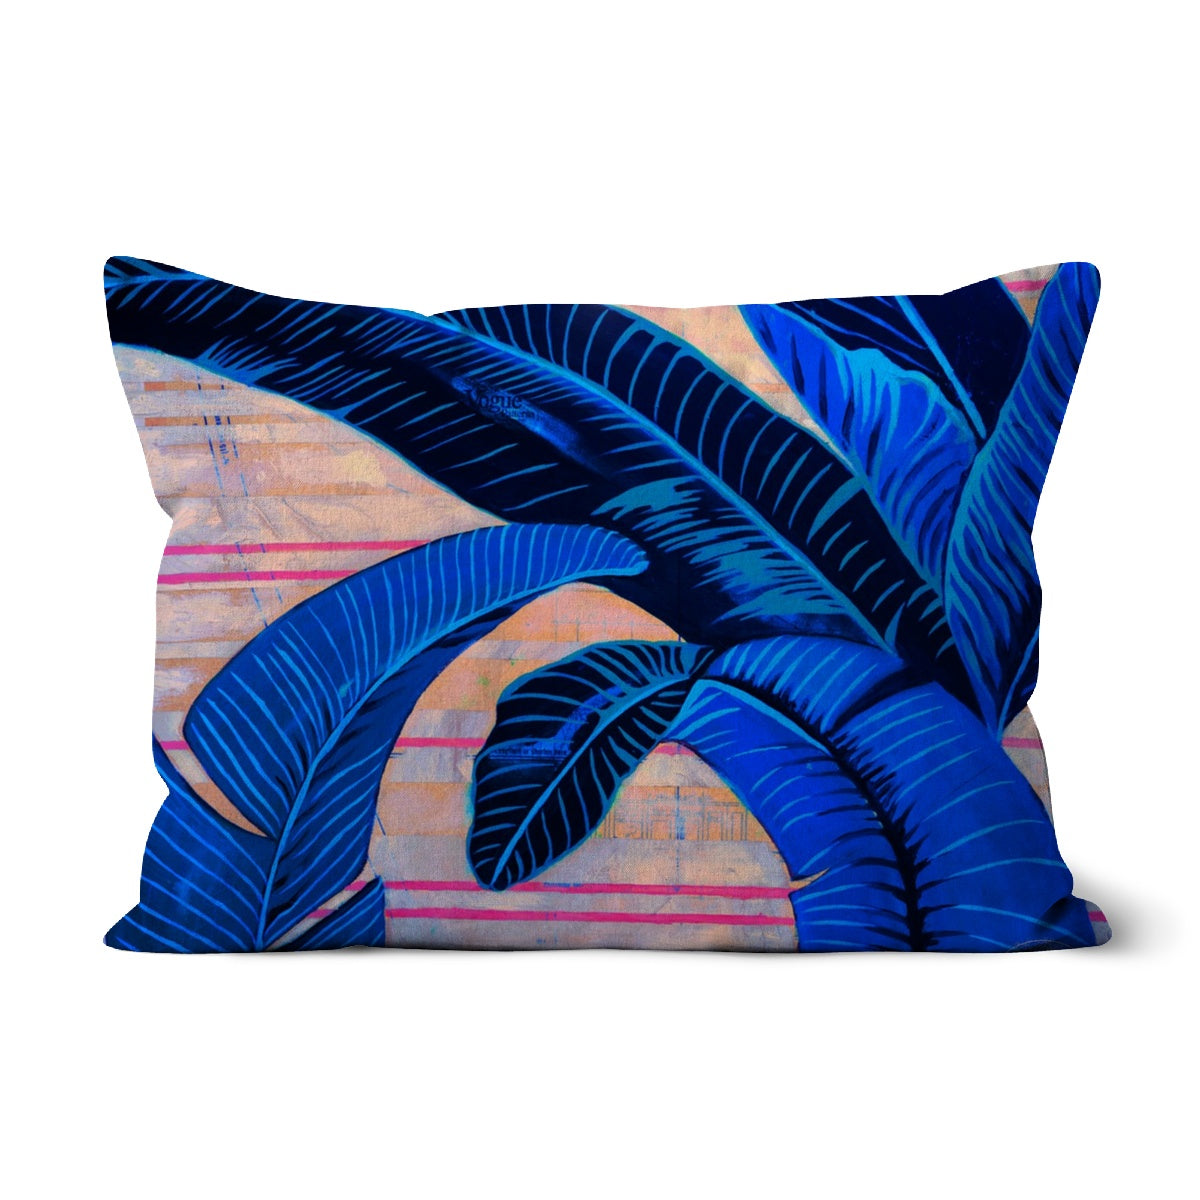 The BHH in Electric Blue Cushion